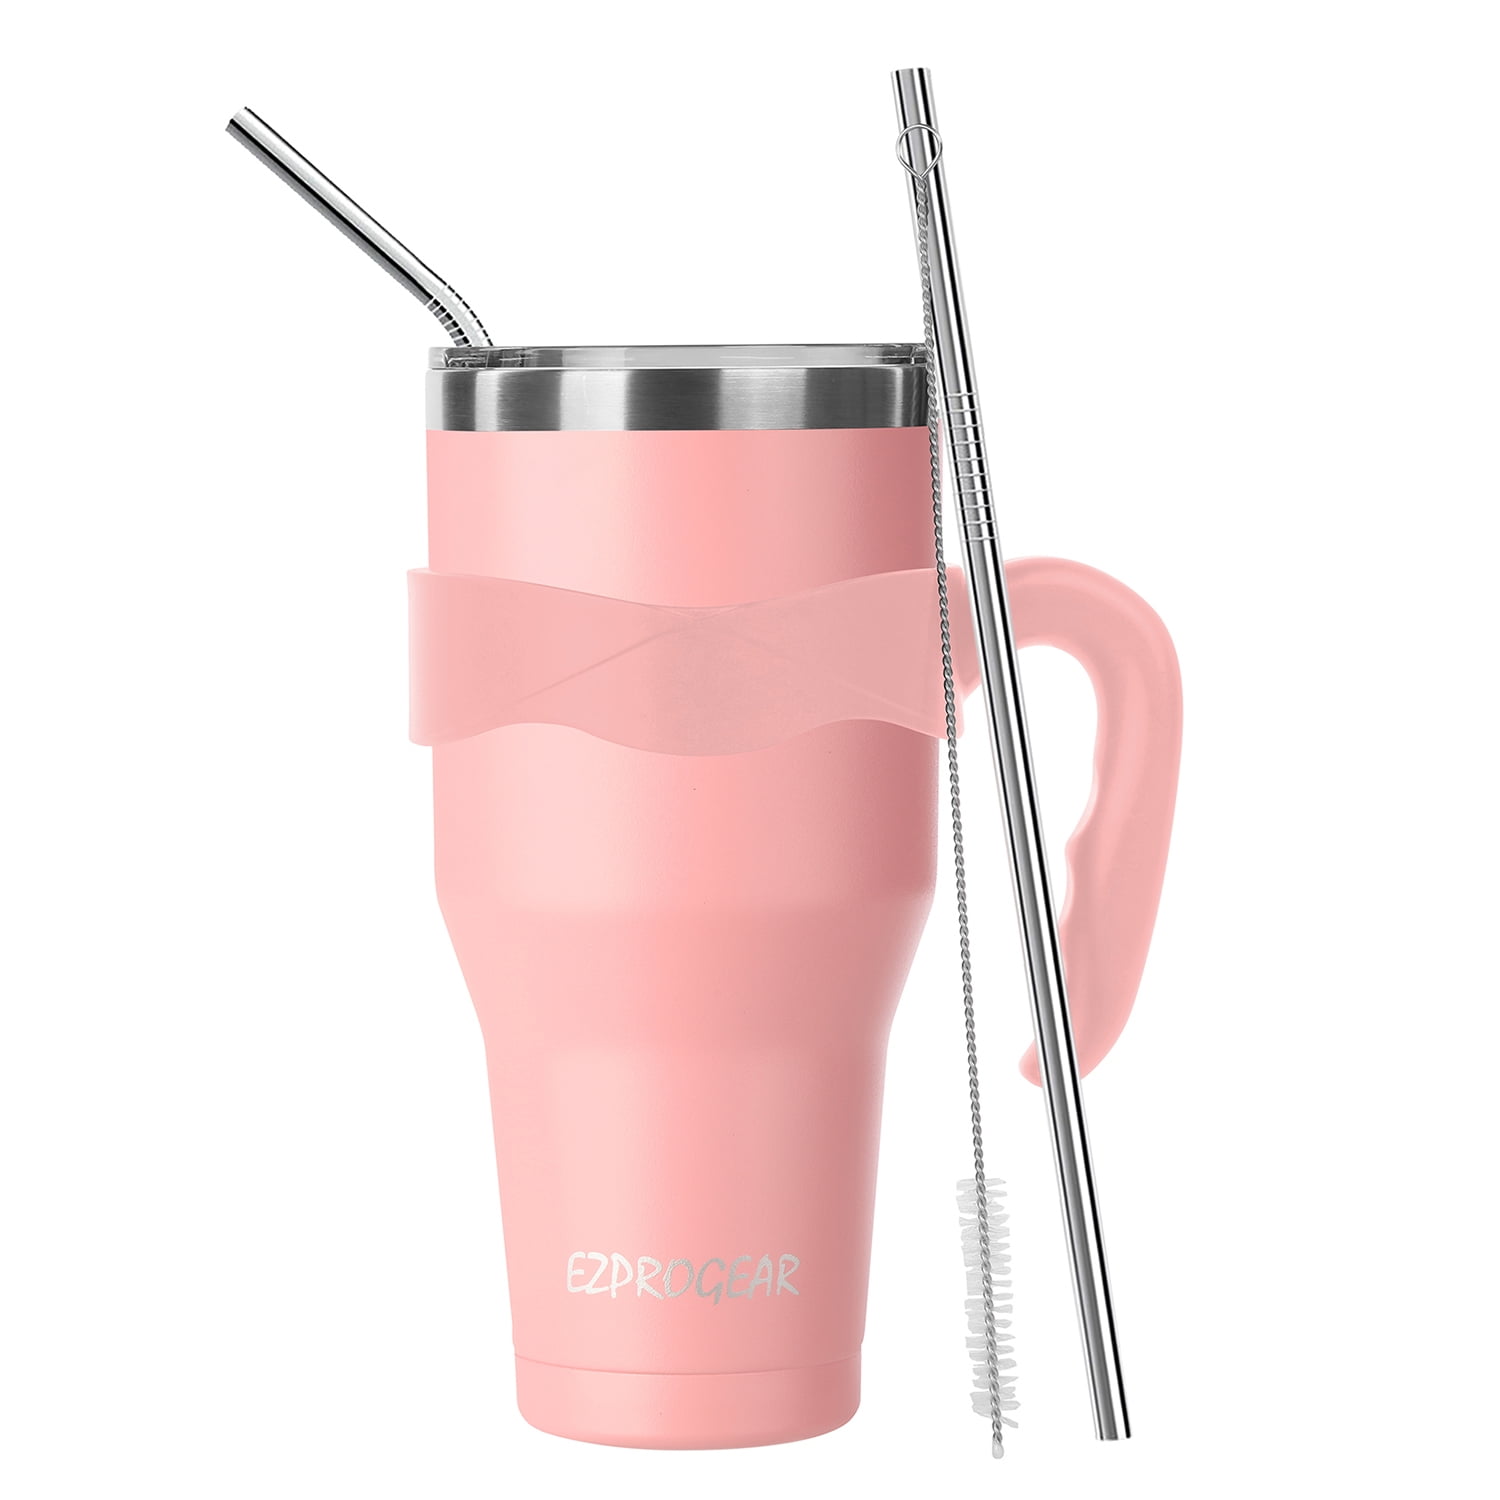 Solid Rose Pink Tumbler Handle, Stretchable Cord, Customizable Paracord  Handle for Coffee Cup, Fits Epoxy Coated Tumblers